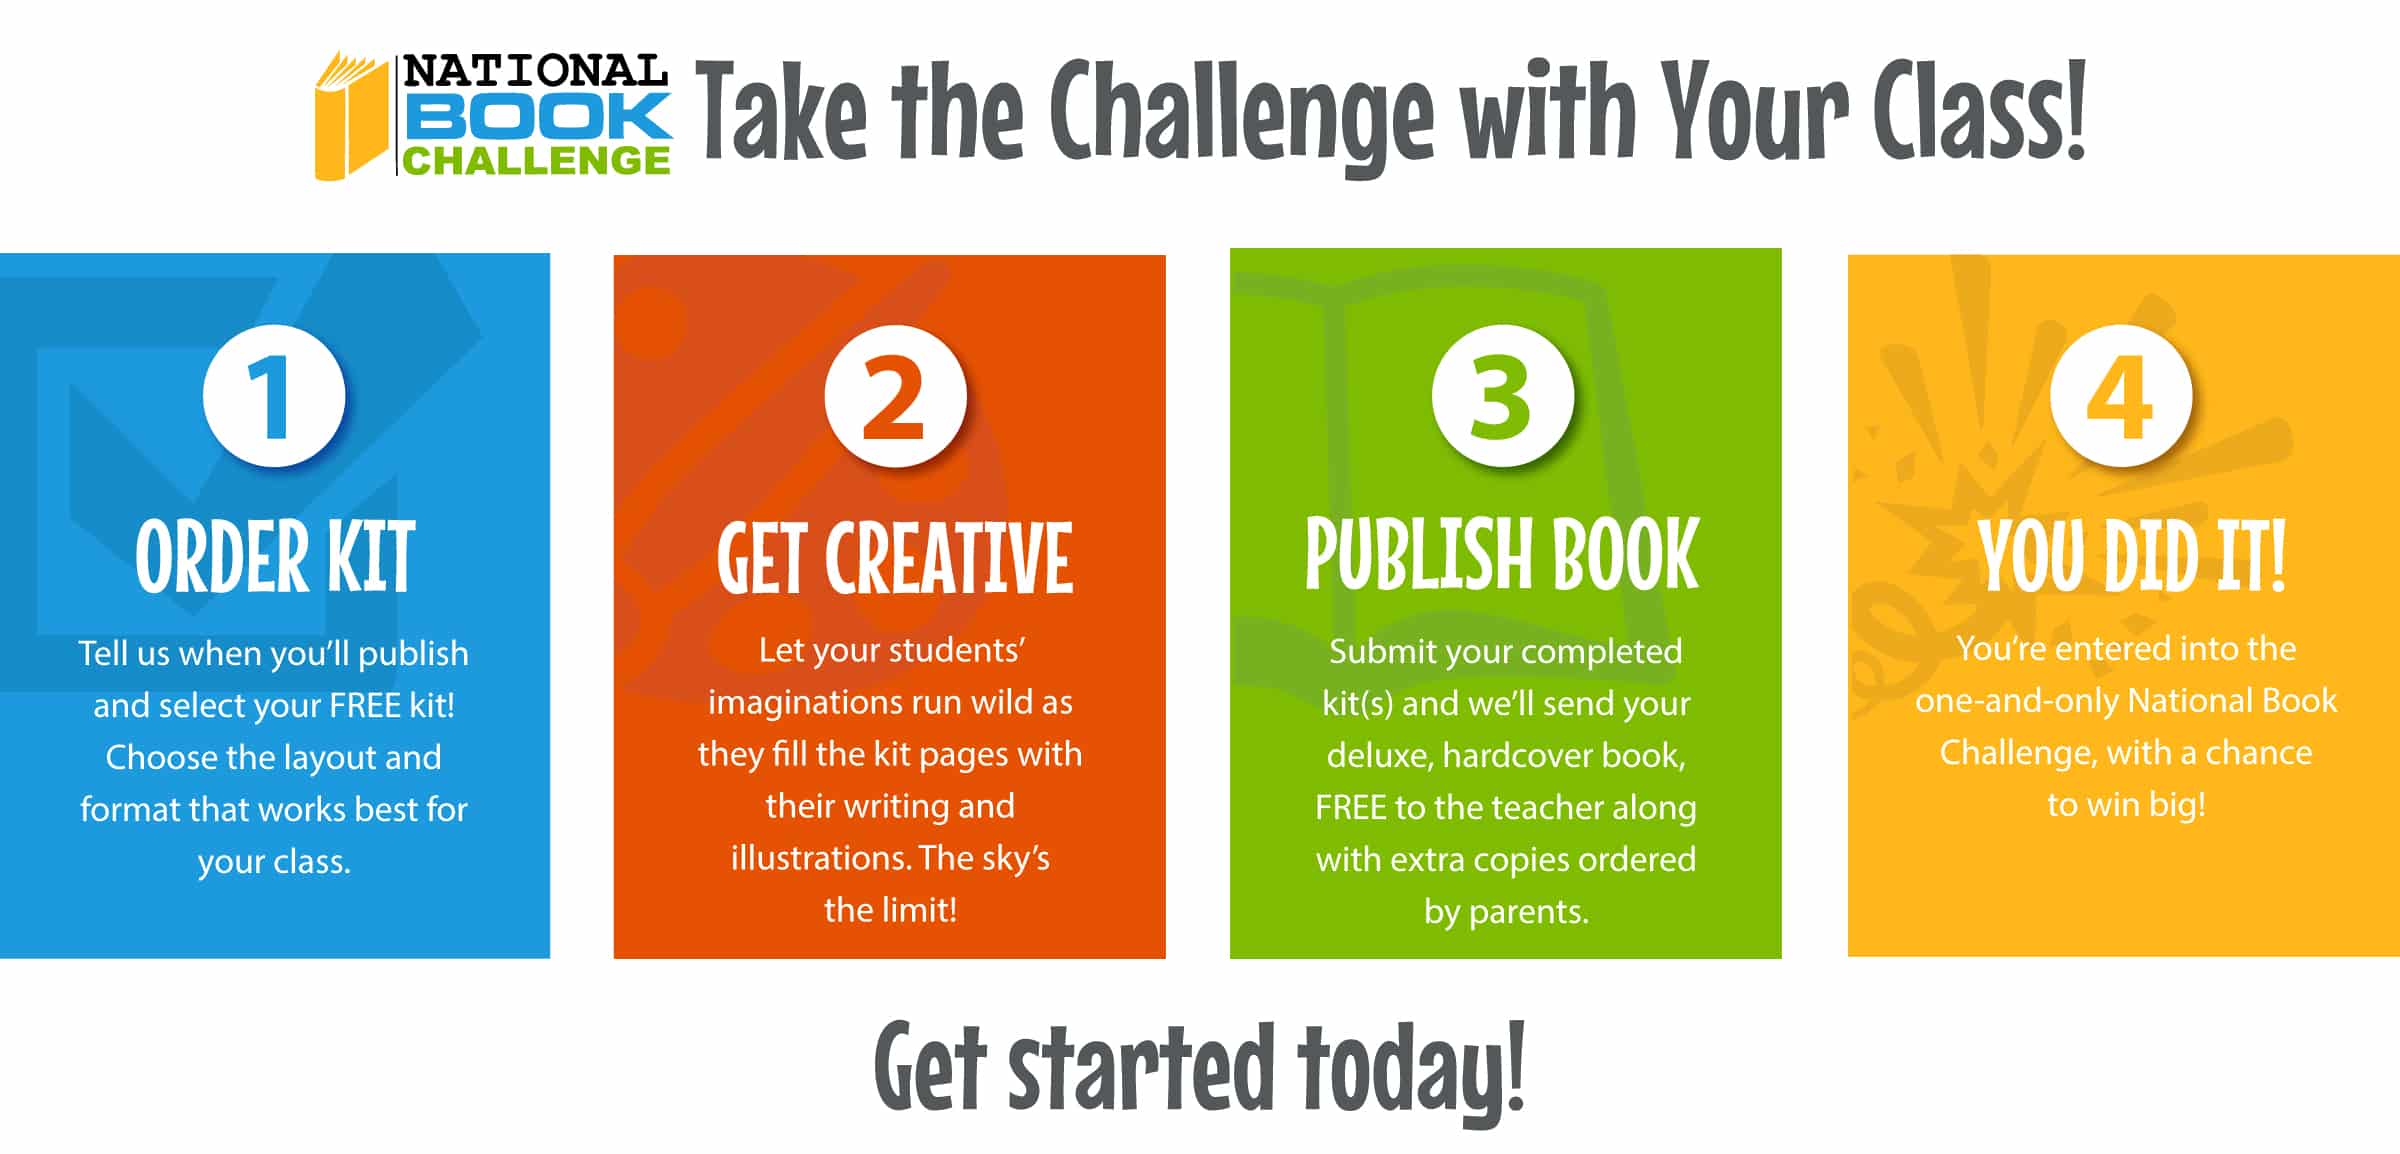 National Book Challenge - Take the challenge with your class! Publishing Steps